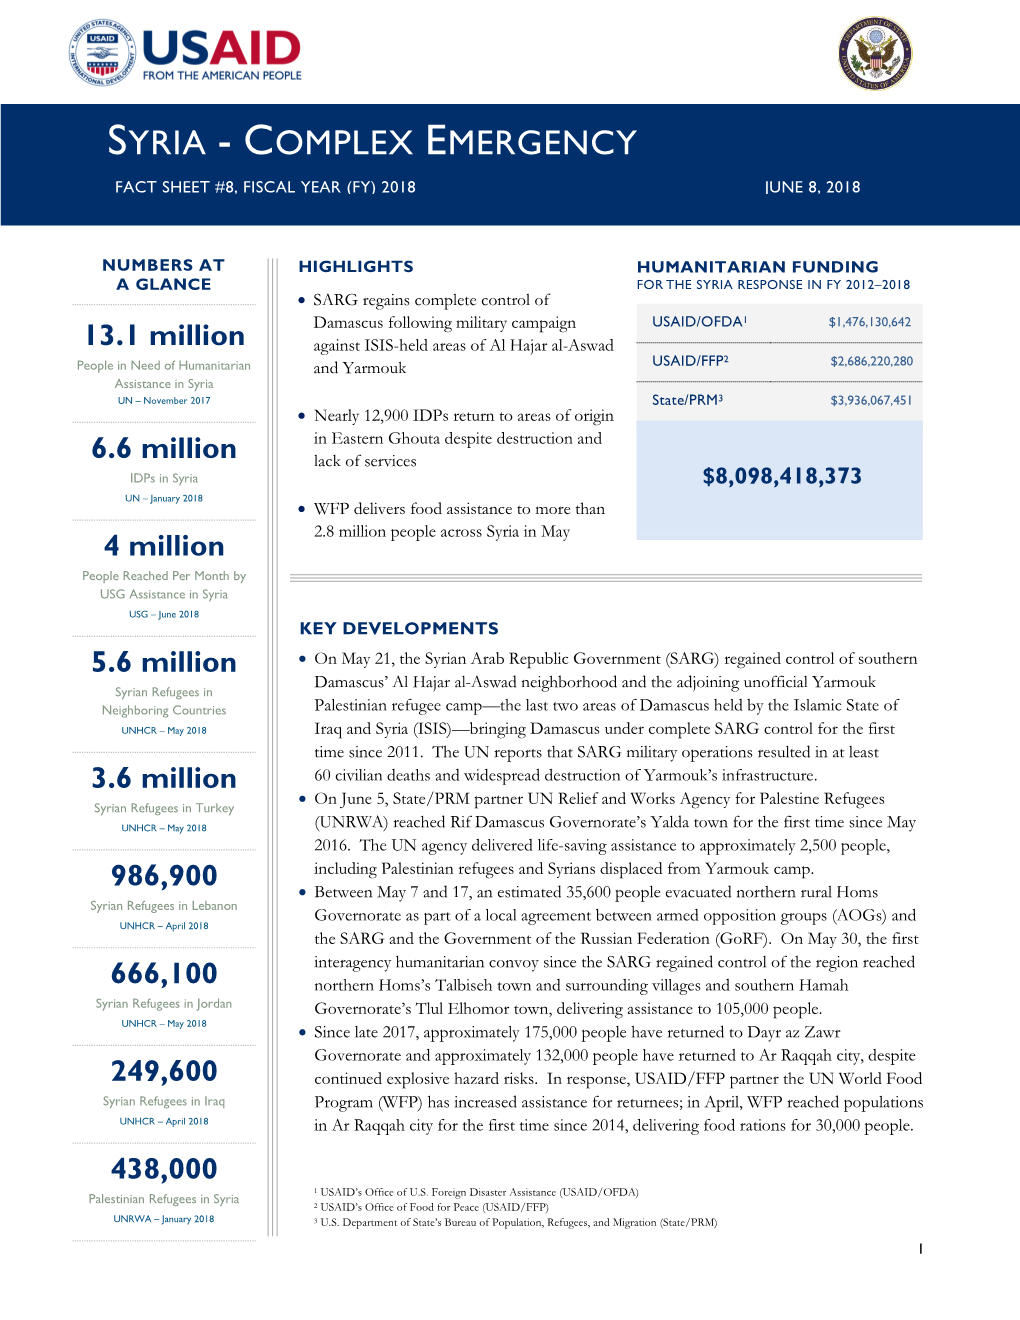 Syria - Complex Emergency Fact Sheet #7, Fiscal Year (Fy) 2018 May 11, 2018